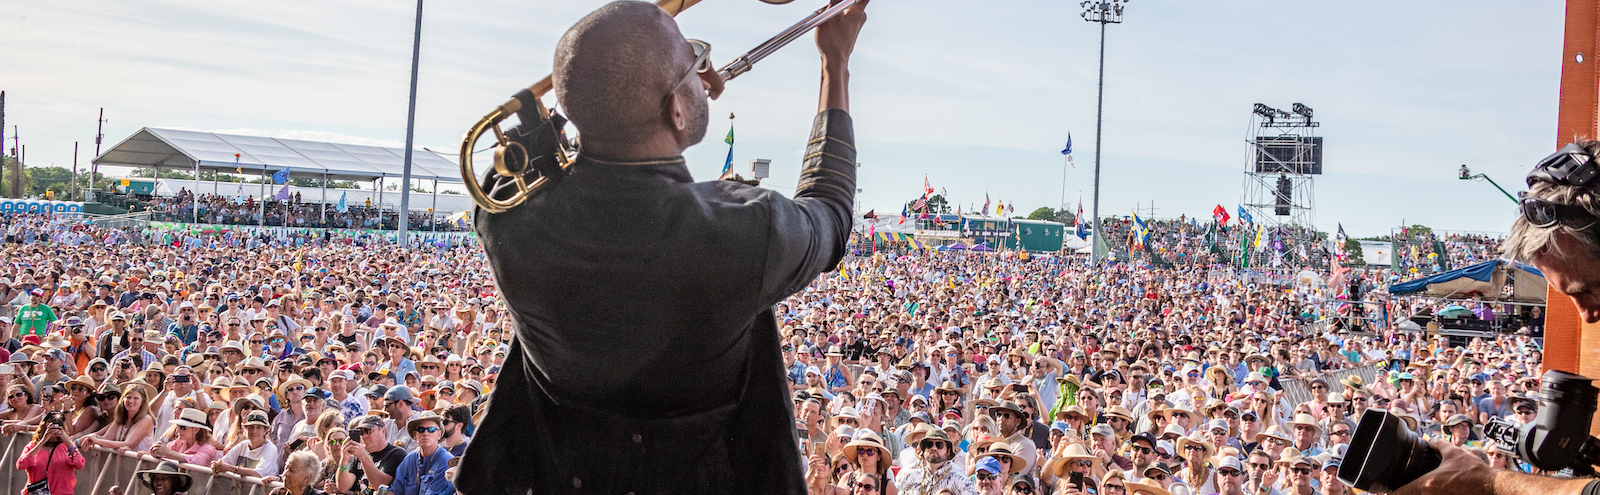 Jazzfest Schedule 2022 New Orleans Jazz Fest 2022 Returns With A Monster Lineup